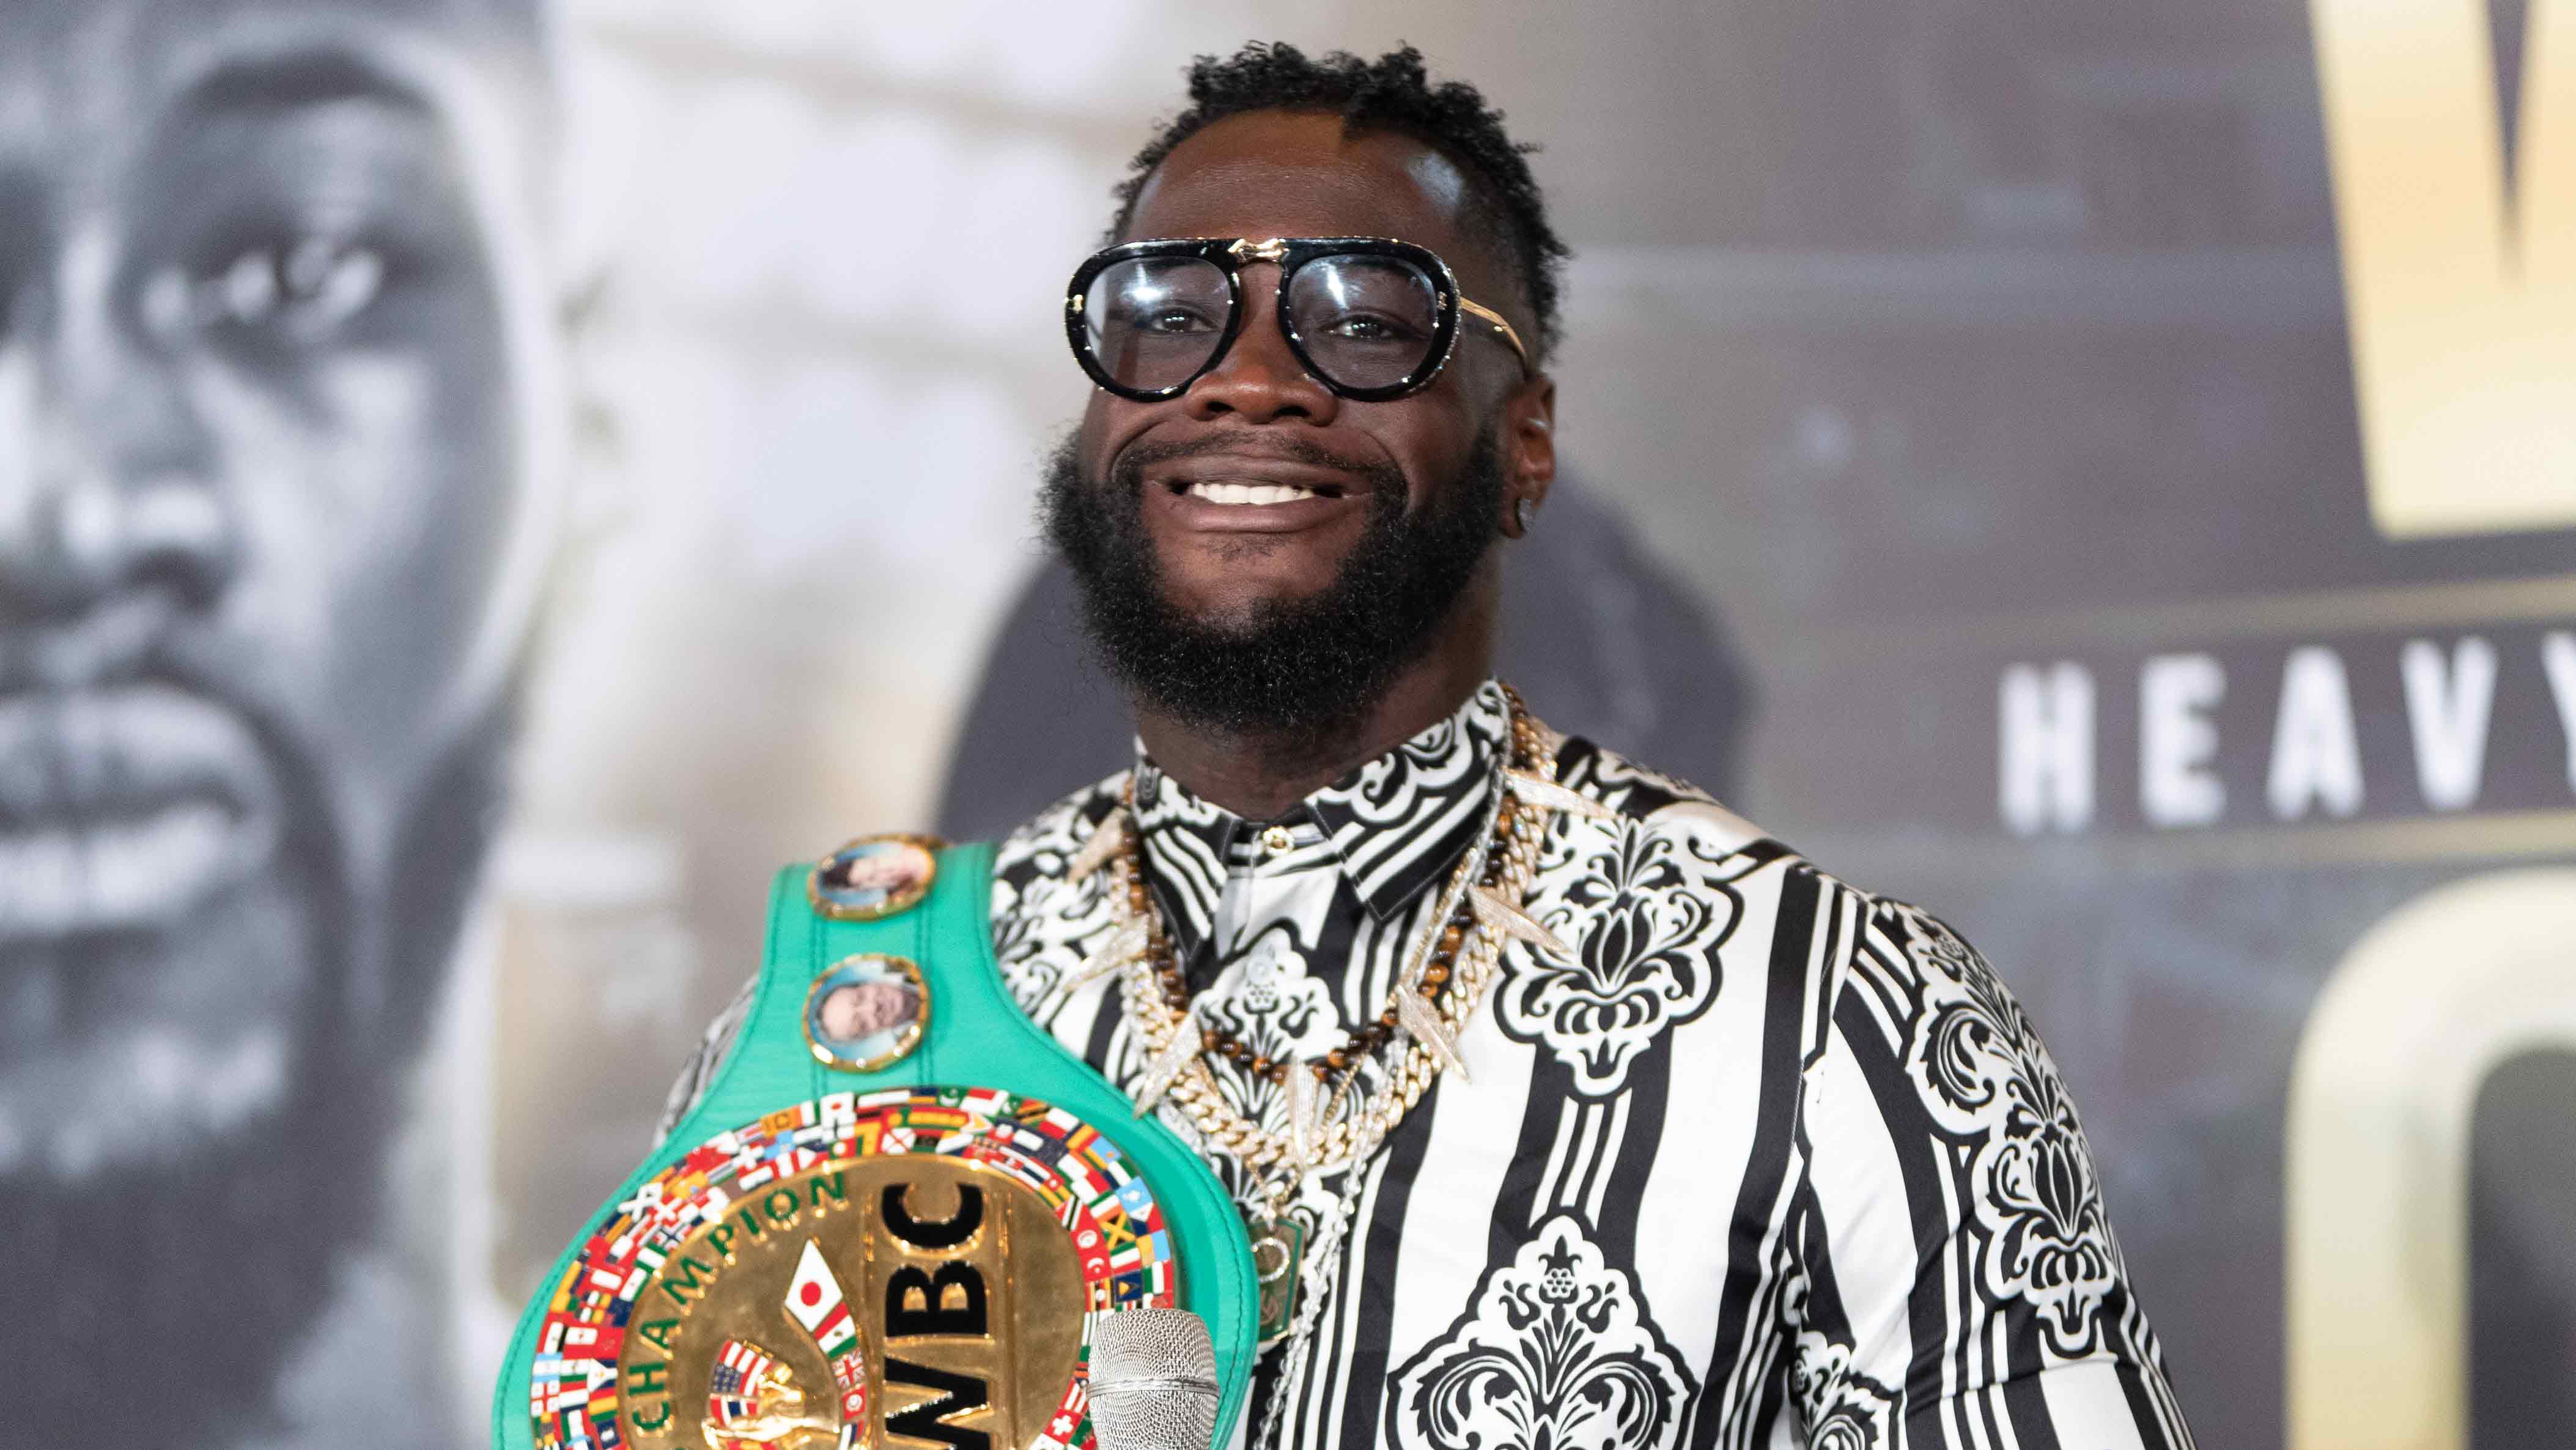 Why was Deontay Wilder silent during the Fury V Wilder 3 press conference?  - Quora